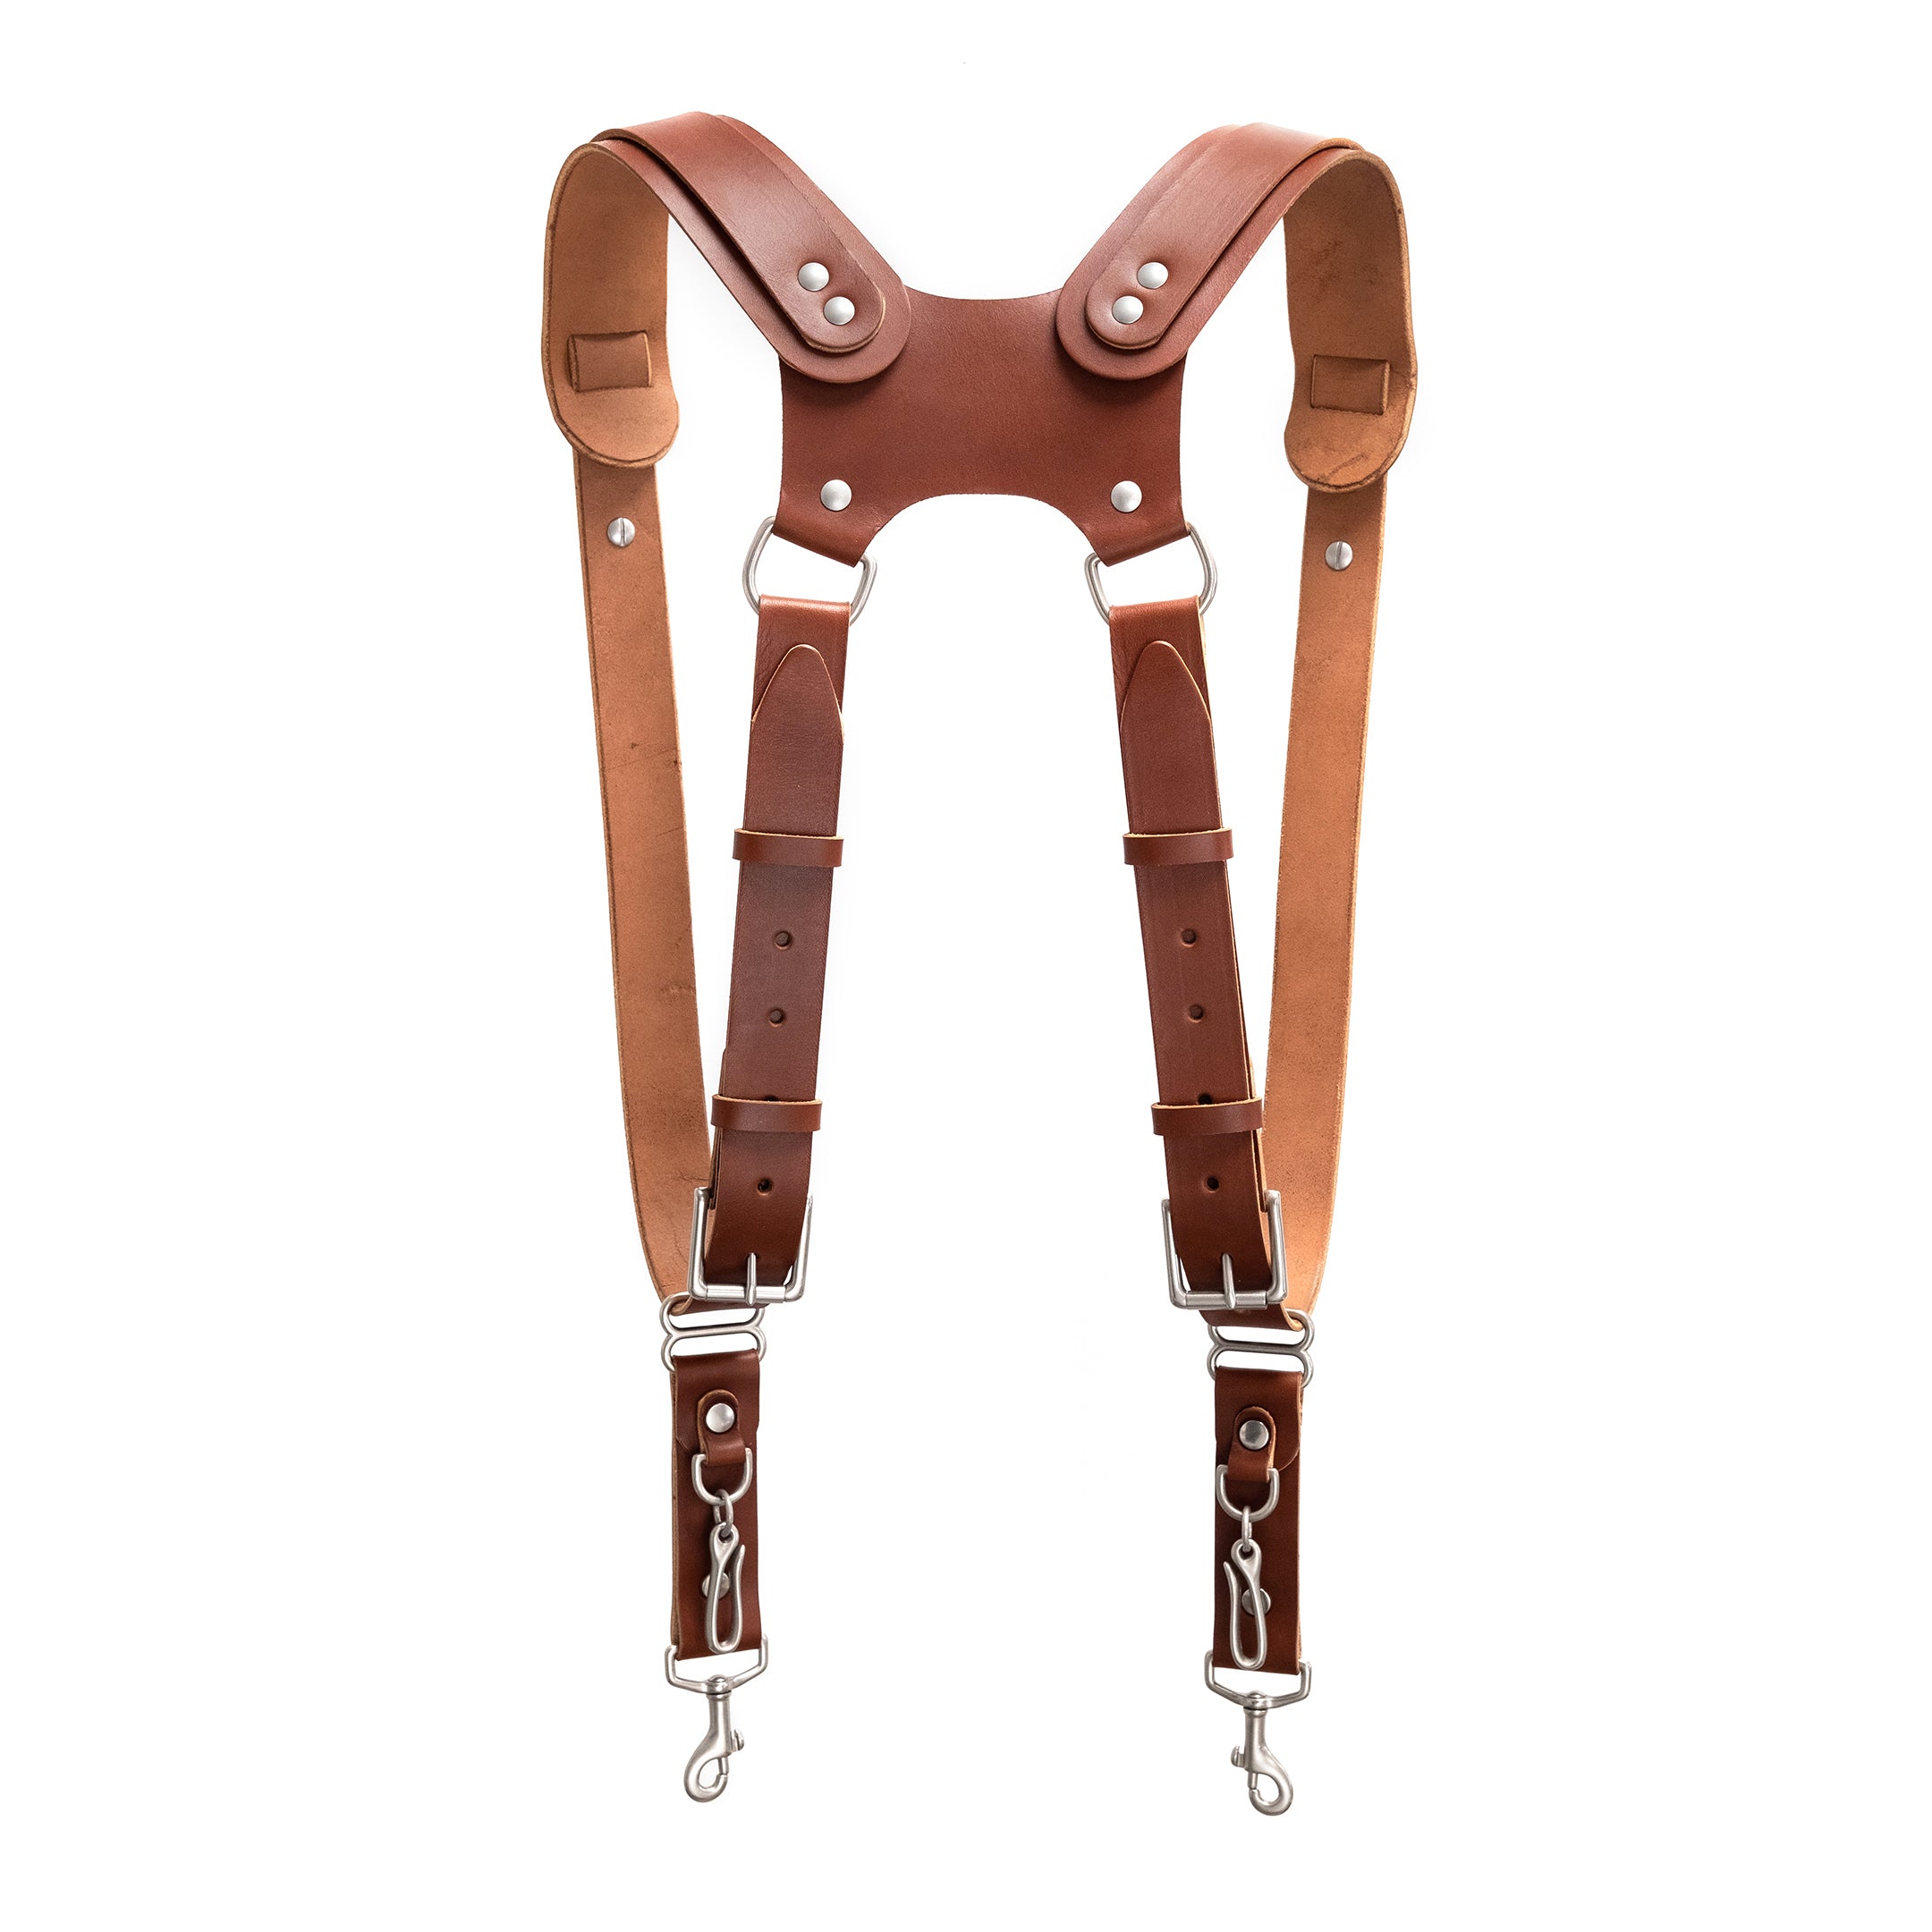 Fab' F22 harness - Brown leather - Size XS